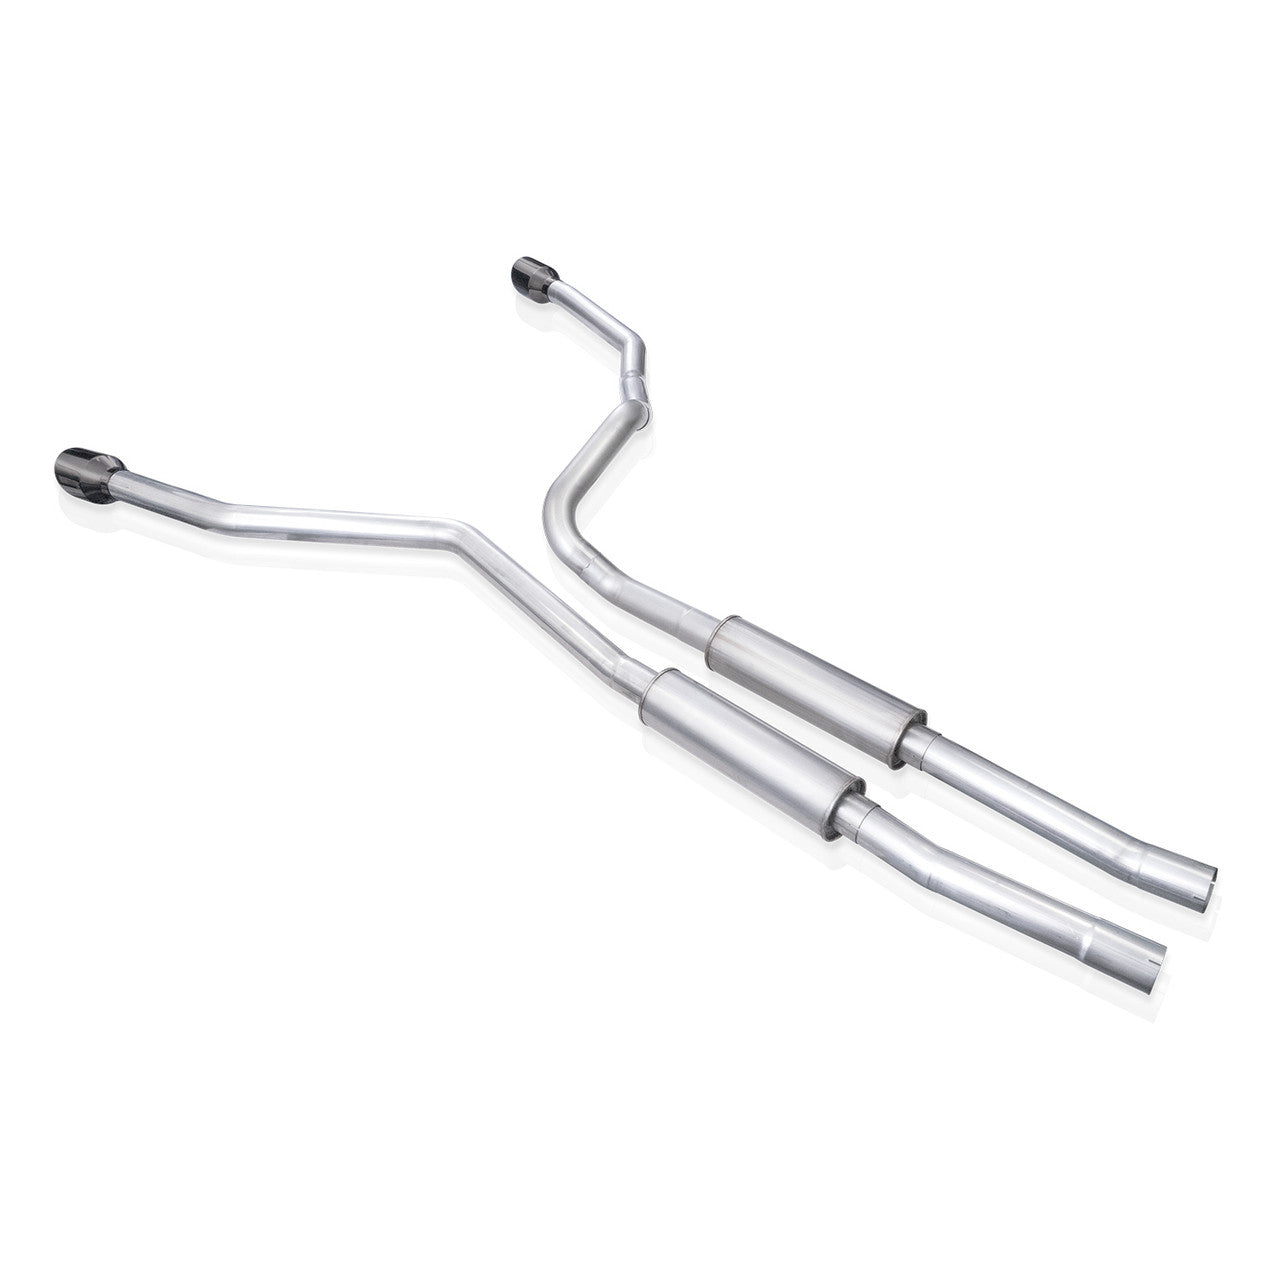 2021 Ram TRX 6.2L Stainless Works Legend Cat-back exhaust system